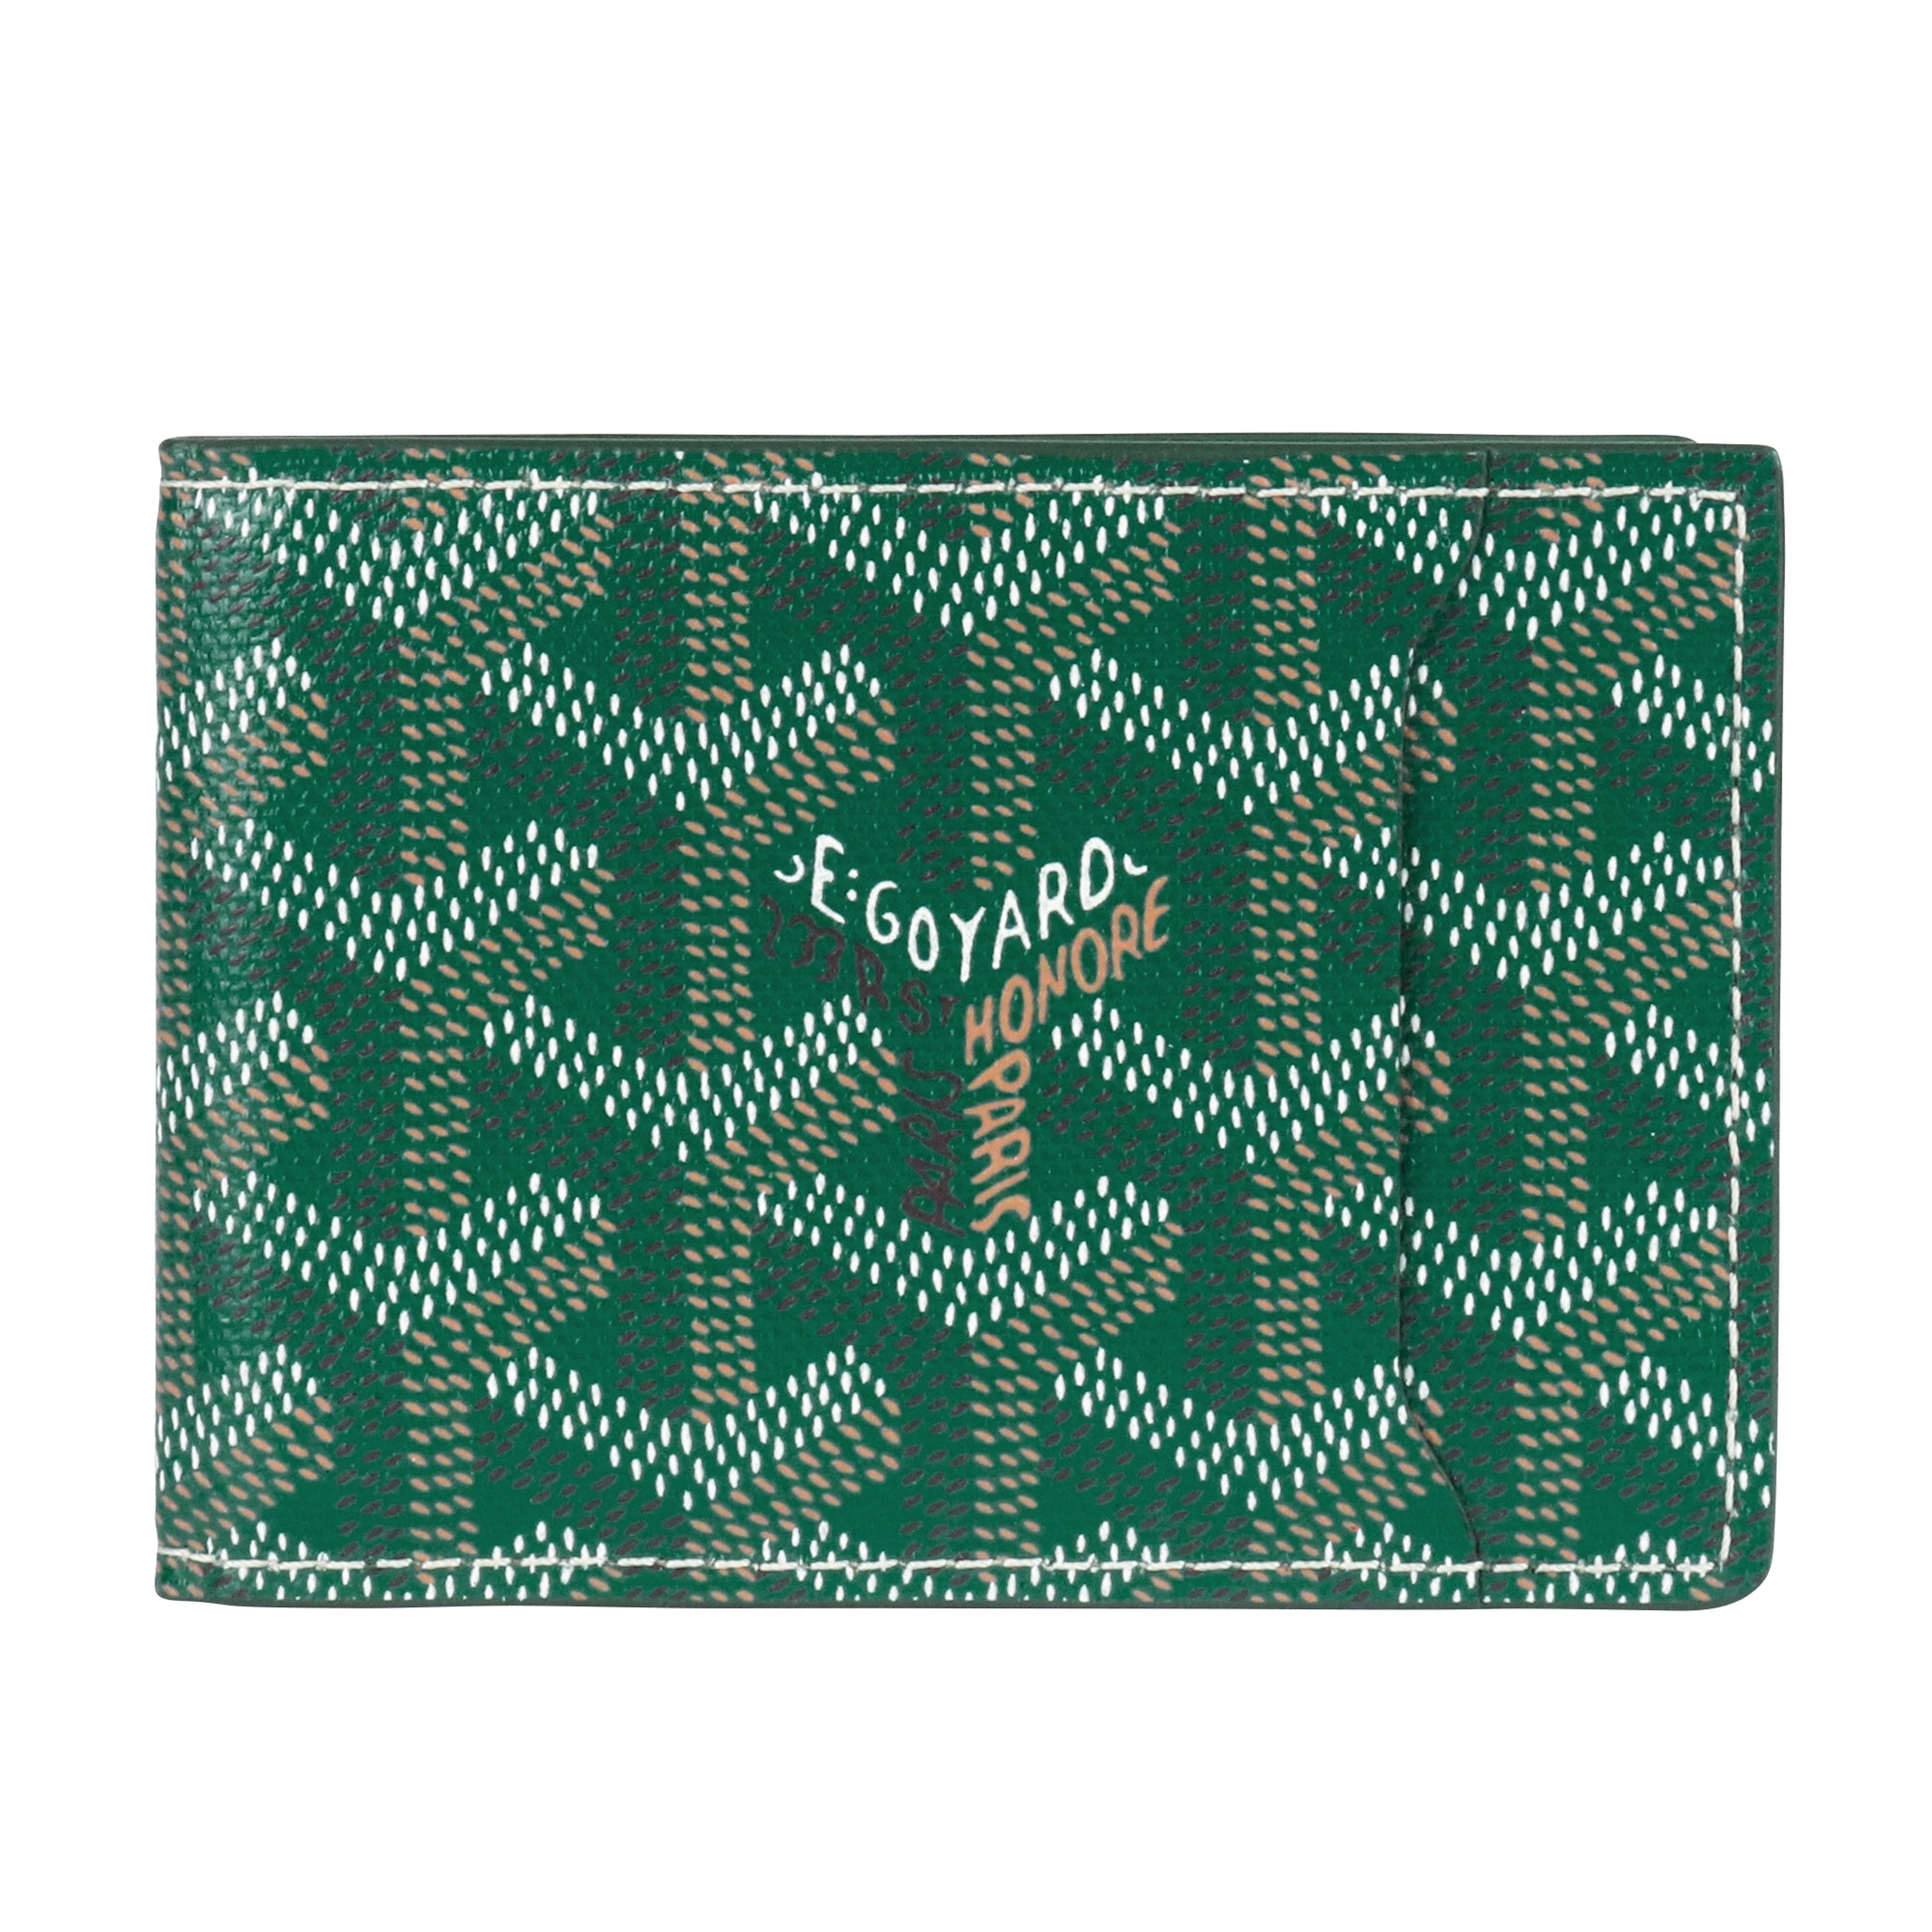 Goyard Victoire Wallet Green - $92 - From Lize